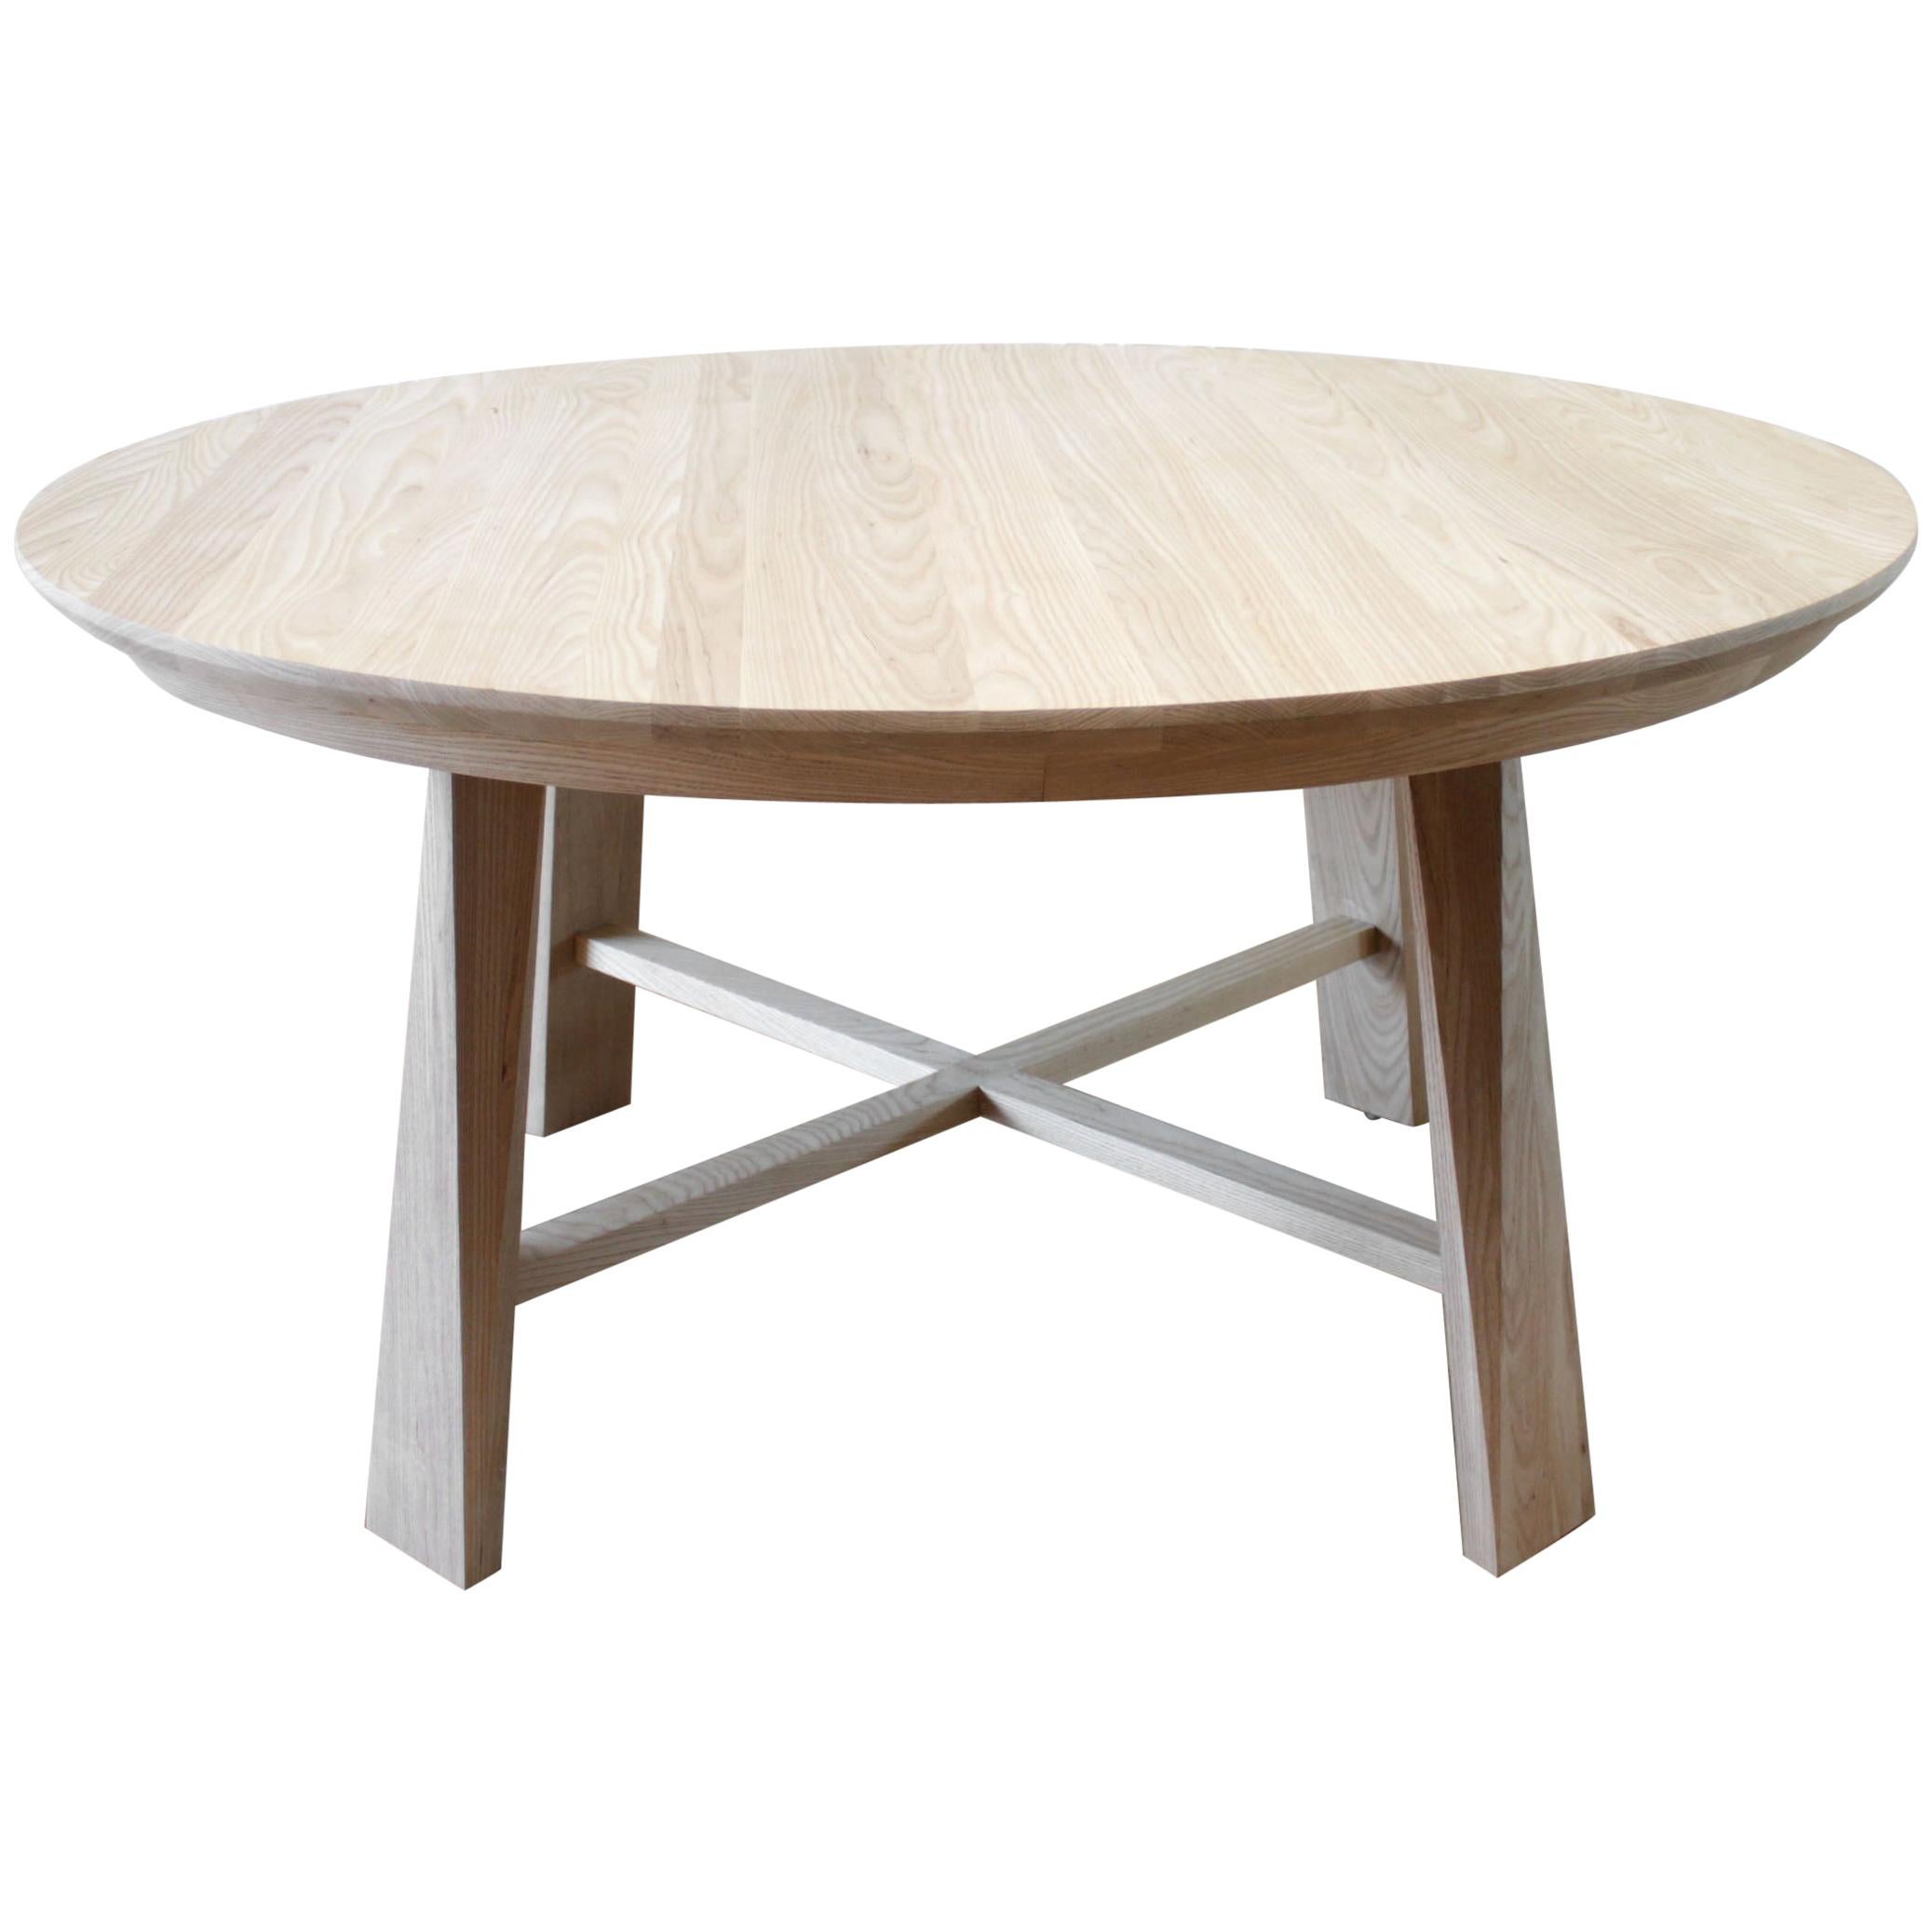 Custom Solid White Oak Round Dining Table For Sale